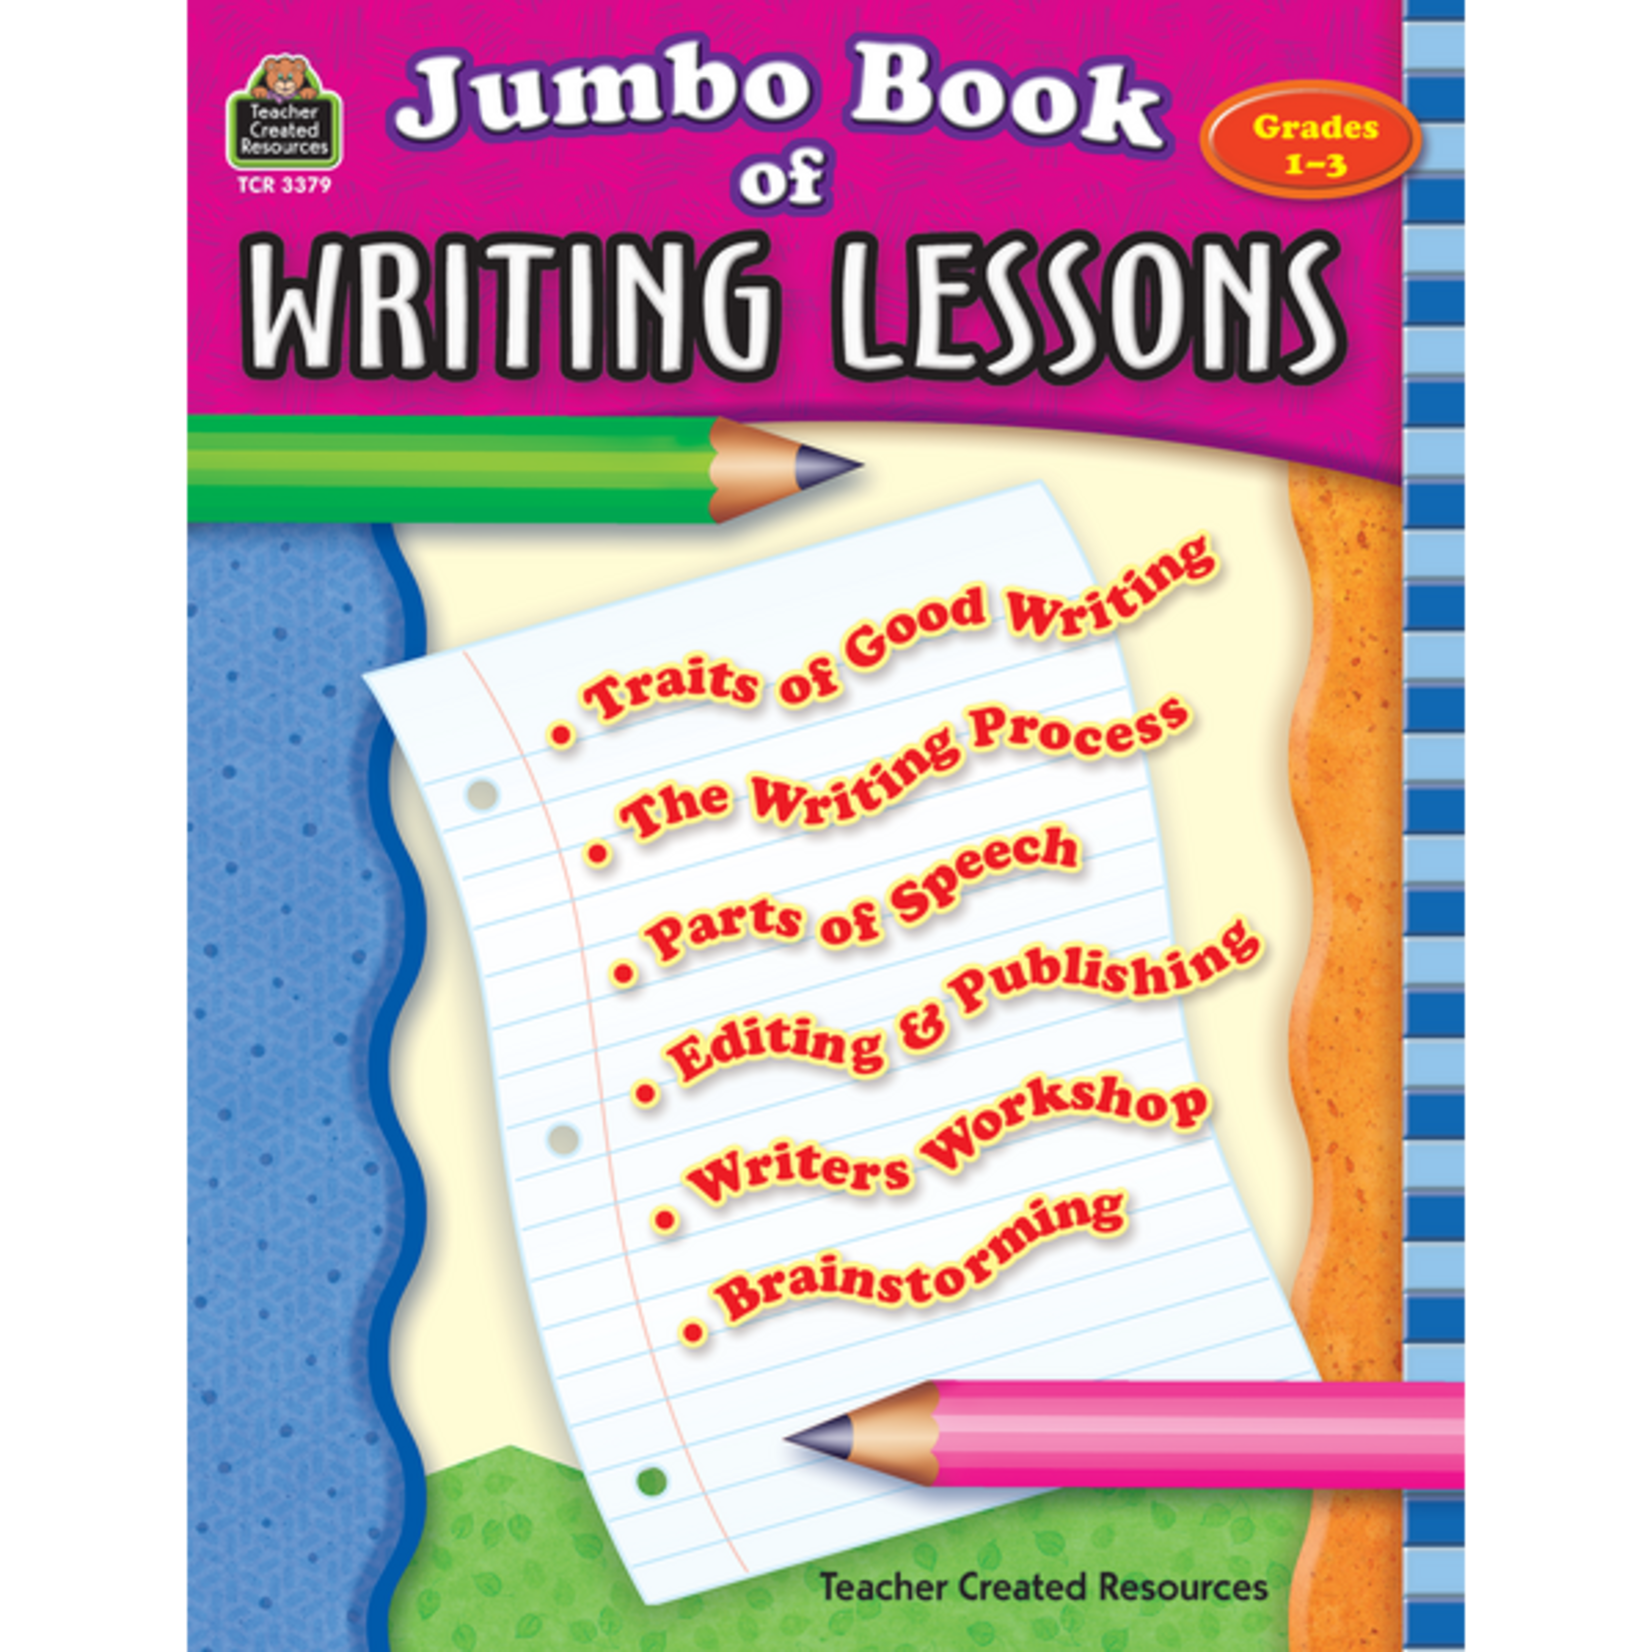 TEACHER CREATED RESOURCES 8umbo Book of Writing Lessons